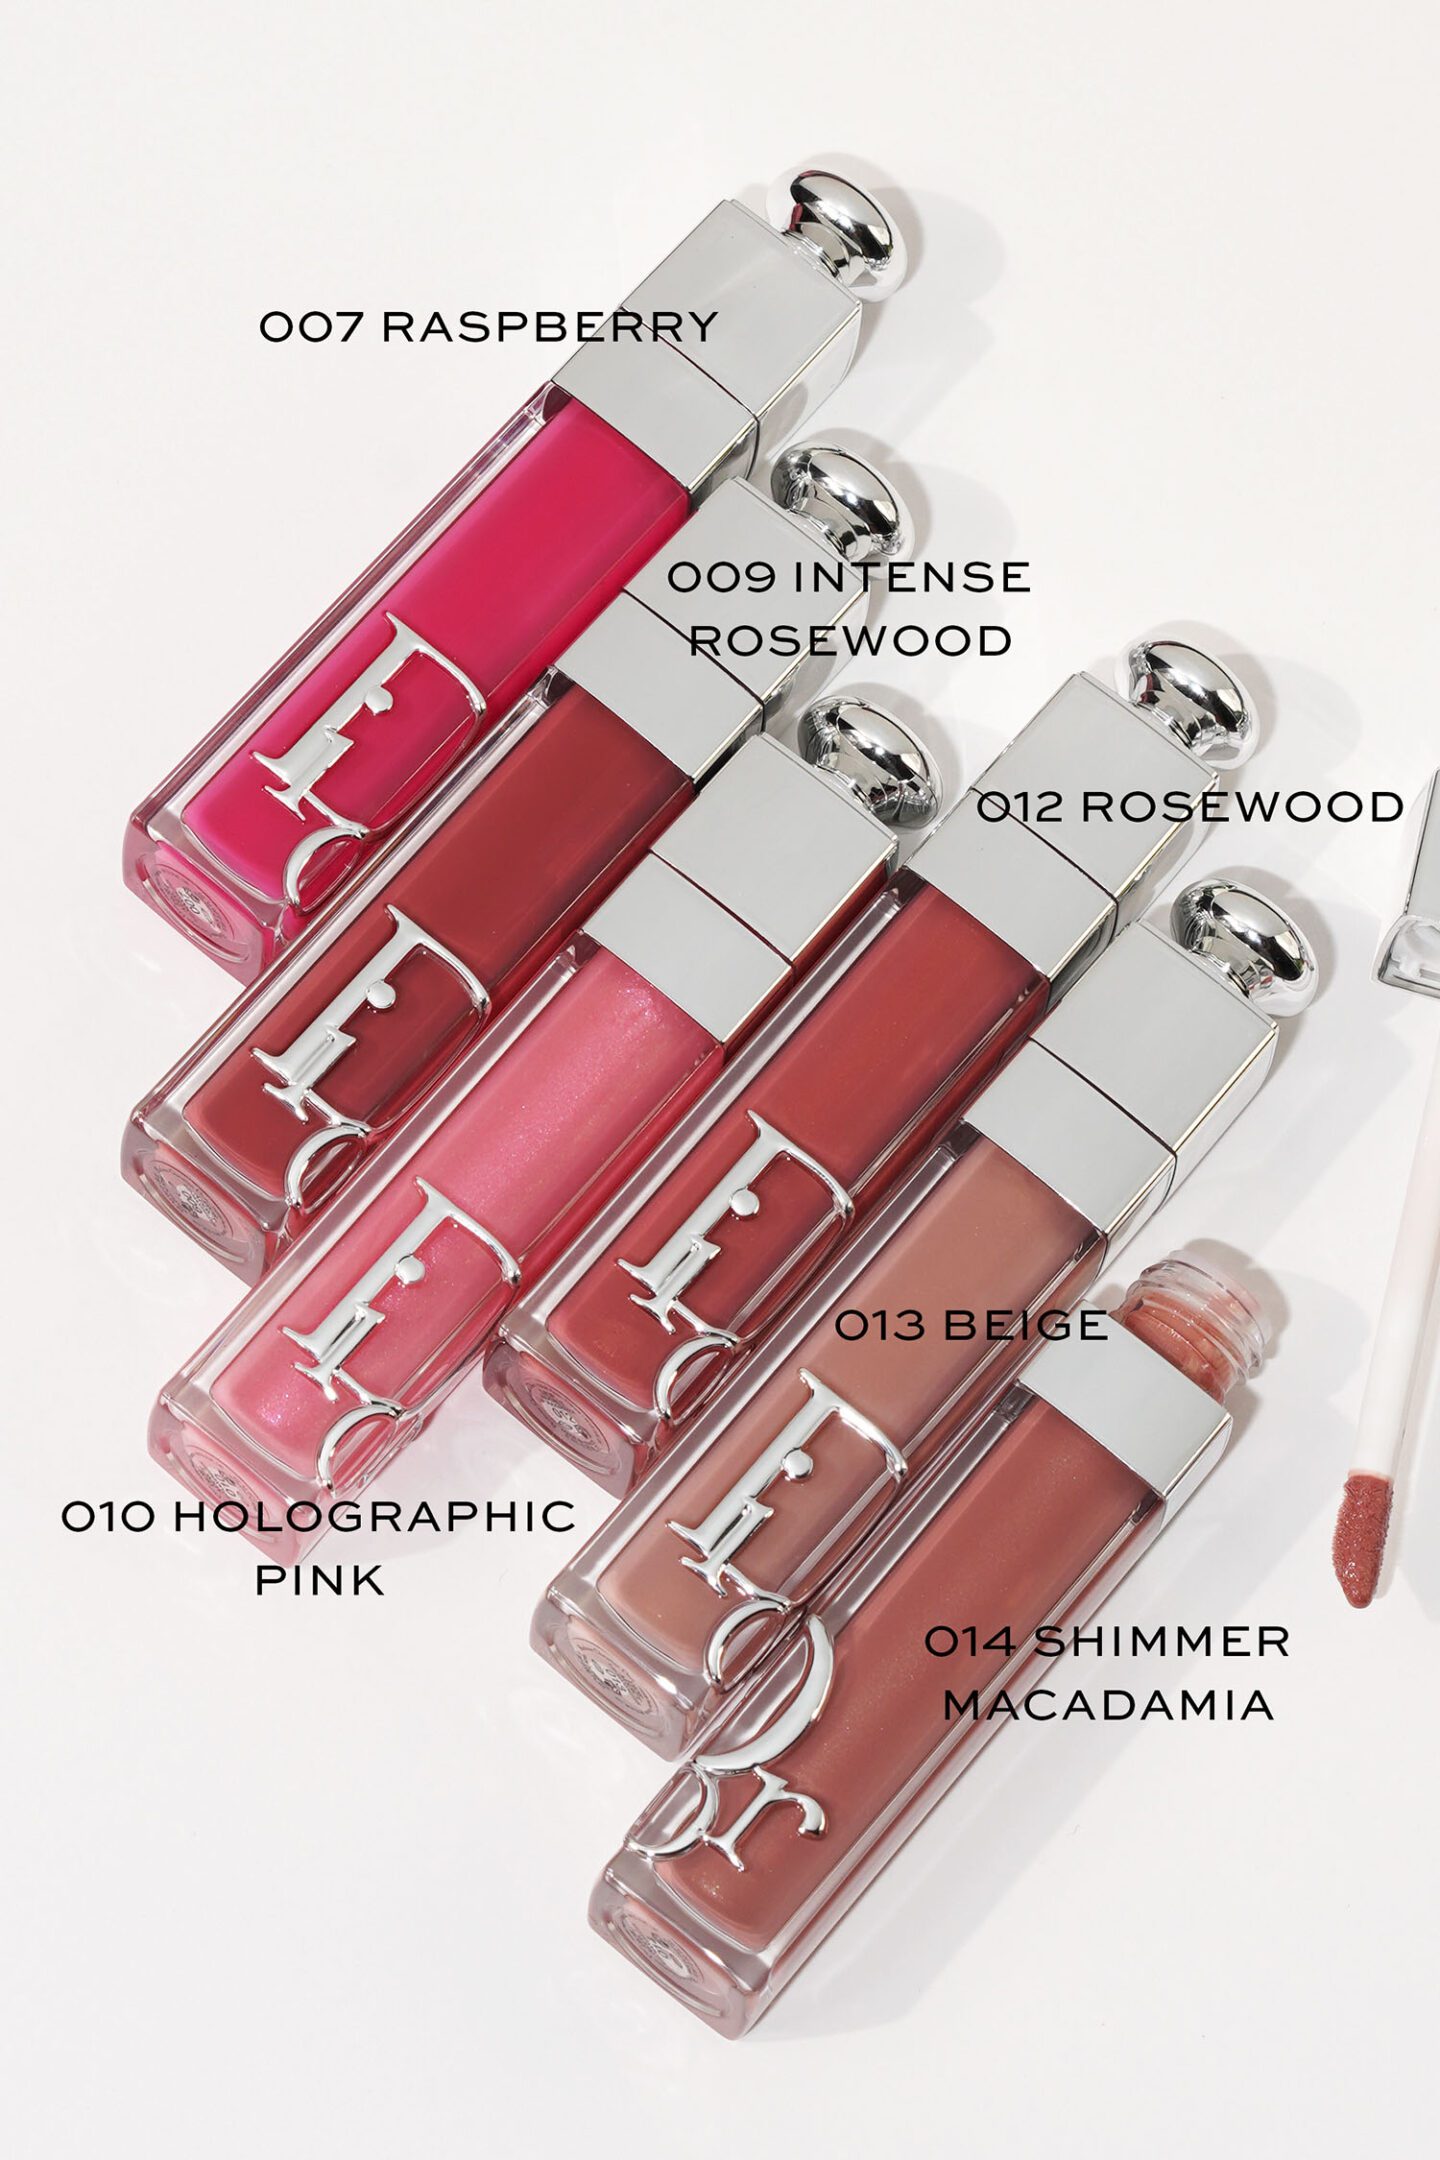 Dior Addict Lip Maximizers in 007 Raspberry, 009 Intense Rosewood, 010 Holographic Pink, 012 Rosewood, 013 Beige and 014 Shimmer Macadamia